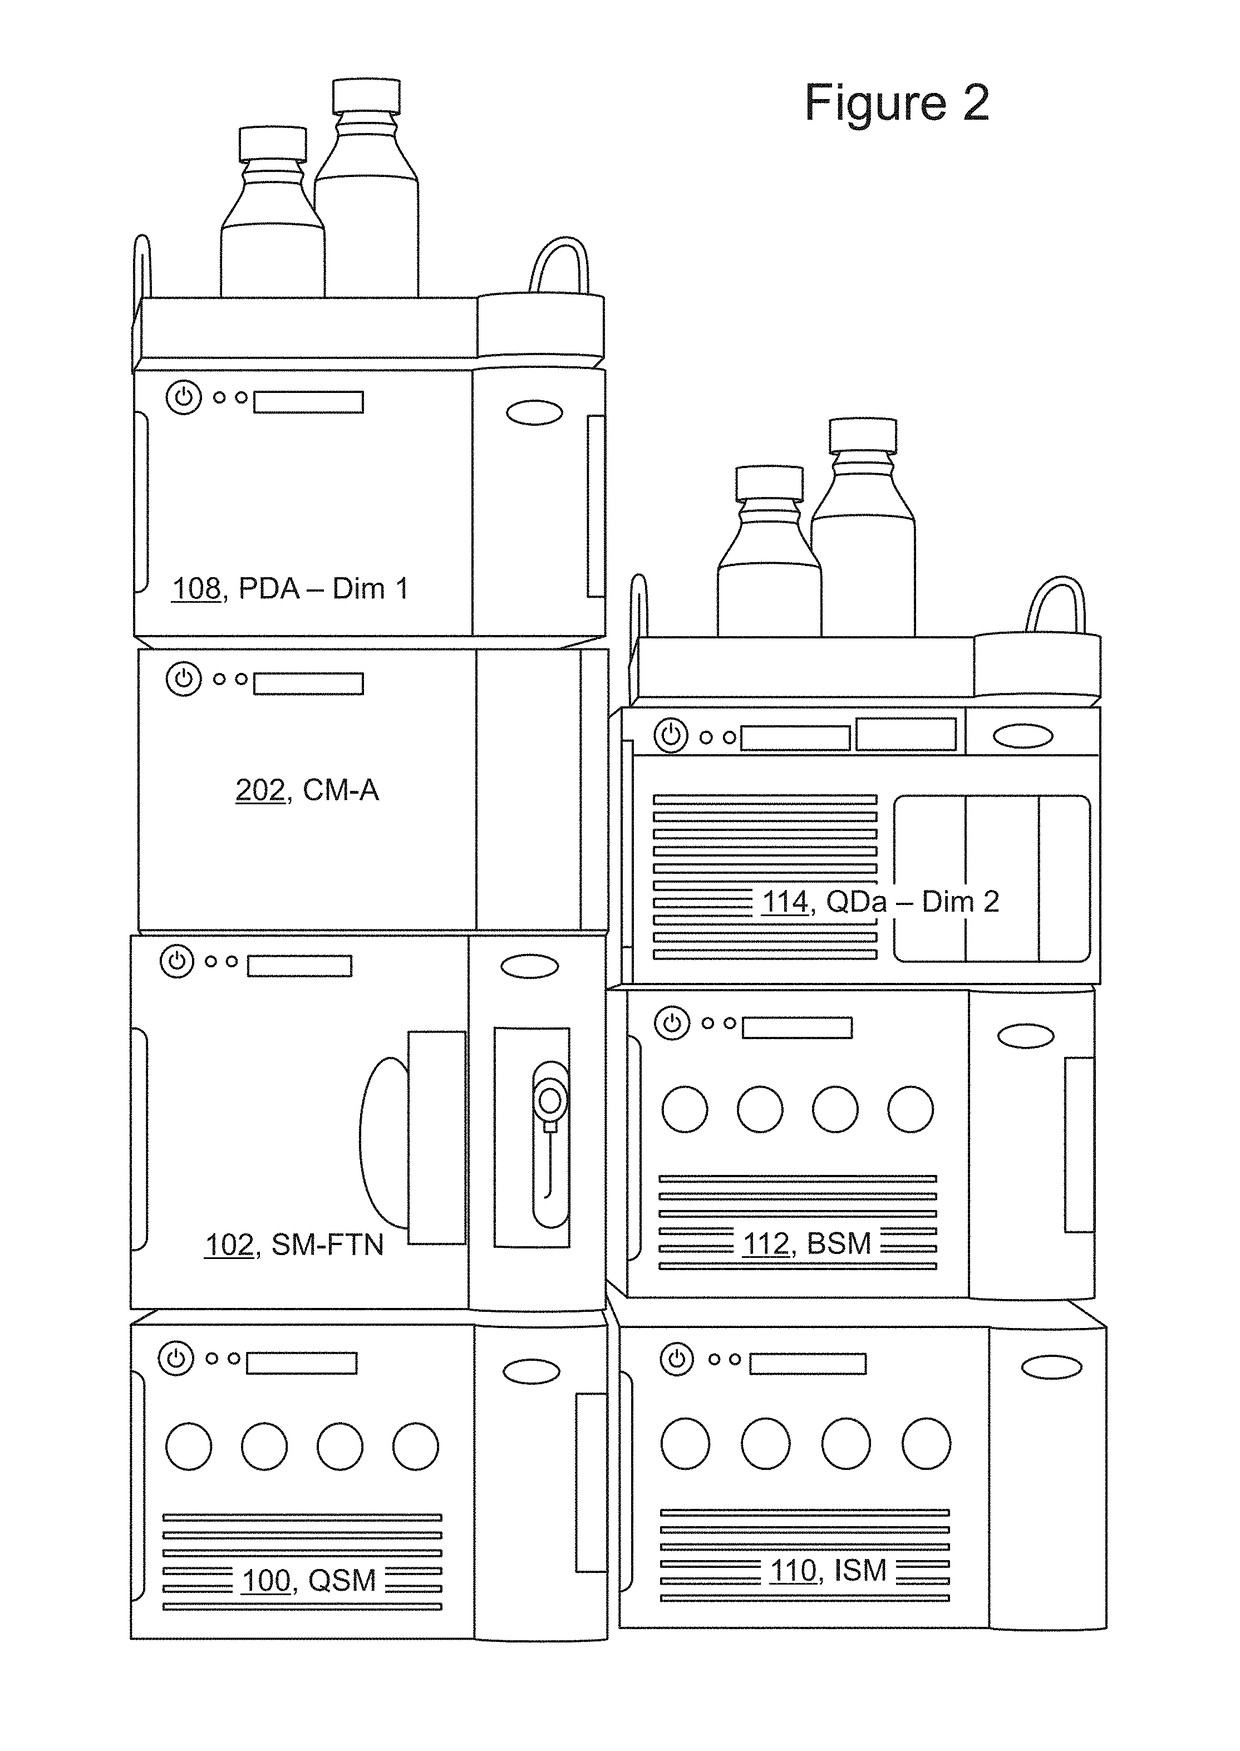 Multi-dimensional chromatography system using at-column dilution